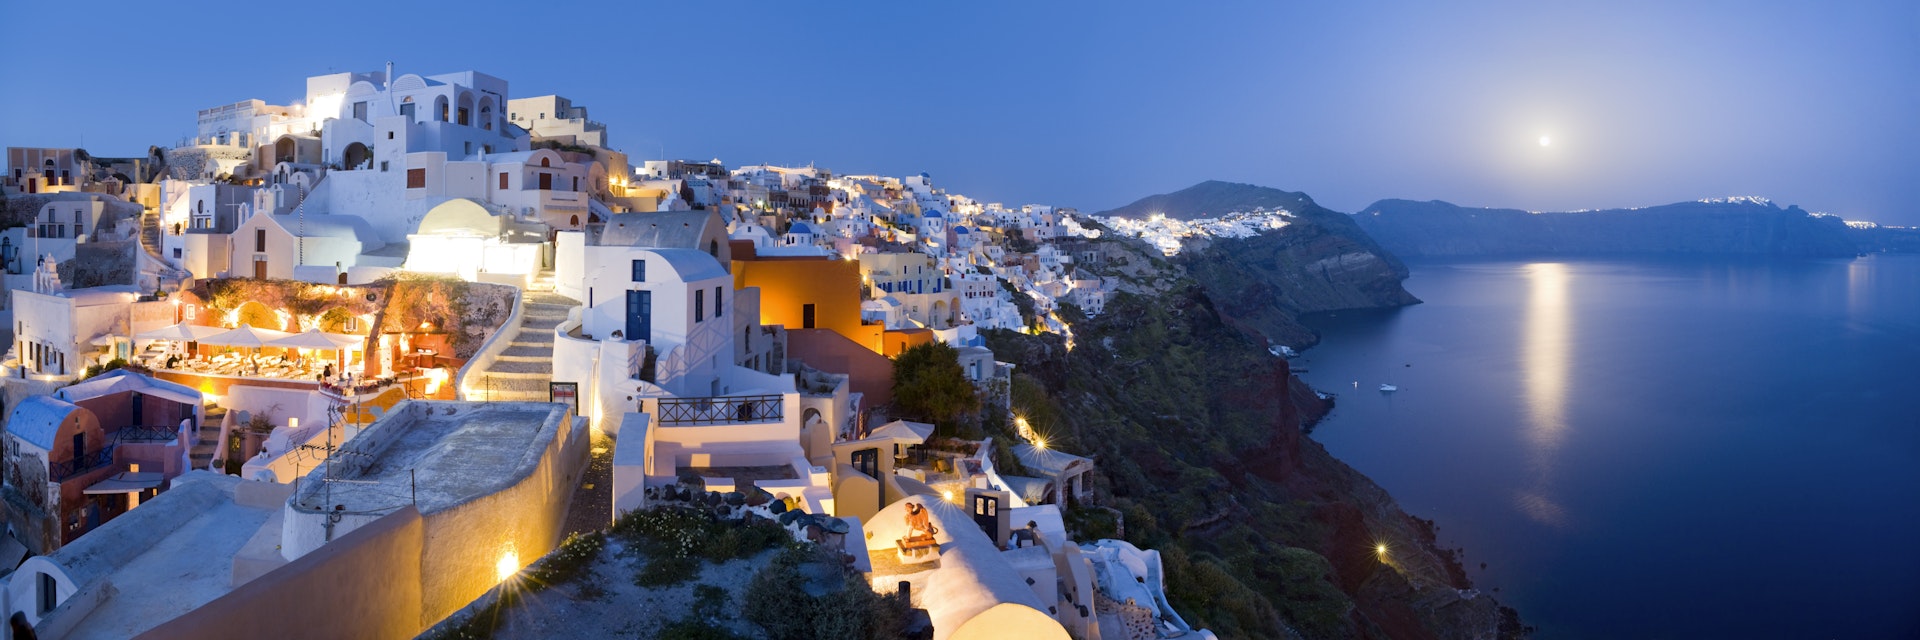 Rooftops of houses and villas on rim of caldera at dusk.